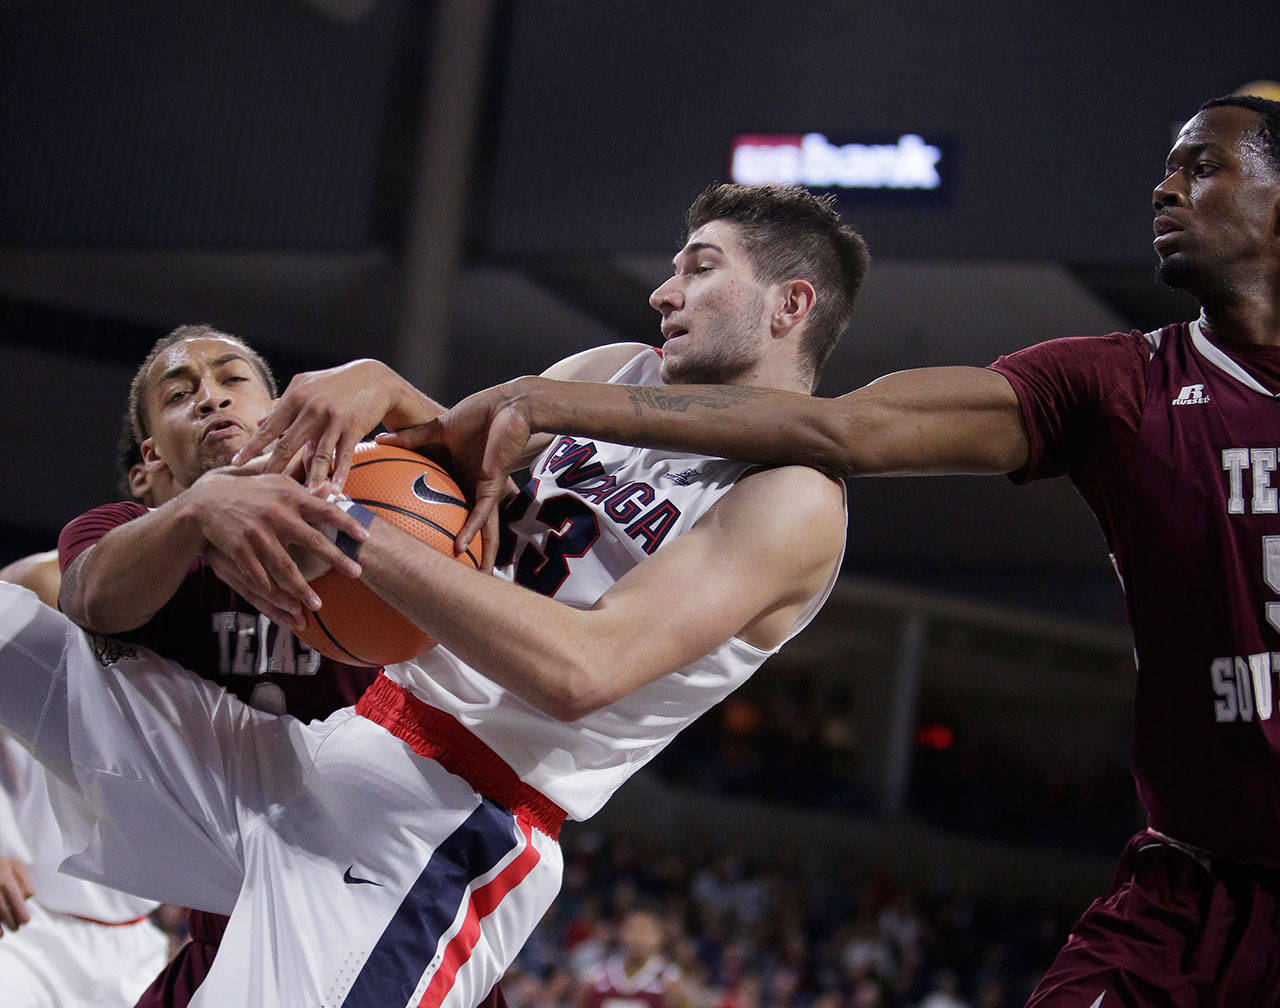 Gonzaga forward Killian Tillie (center) goes after a rebound against Texas Southern forward Kevin Scott (left) and center Trayvon Reed during the first half of a game Nov. 10, 2017, in Spokane. (AP Photo/Young Kwak)